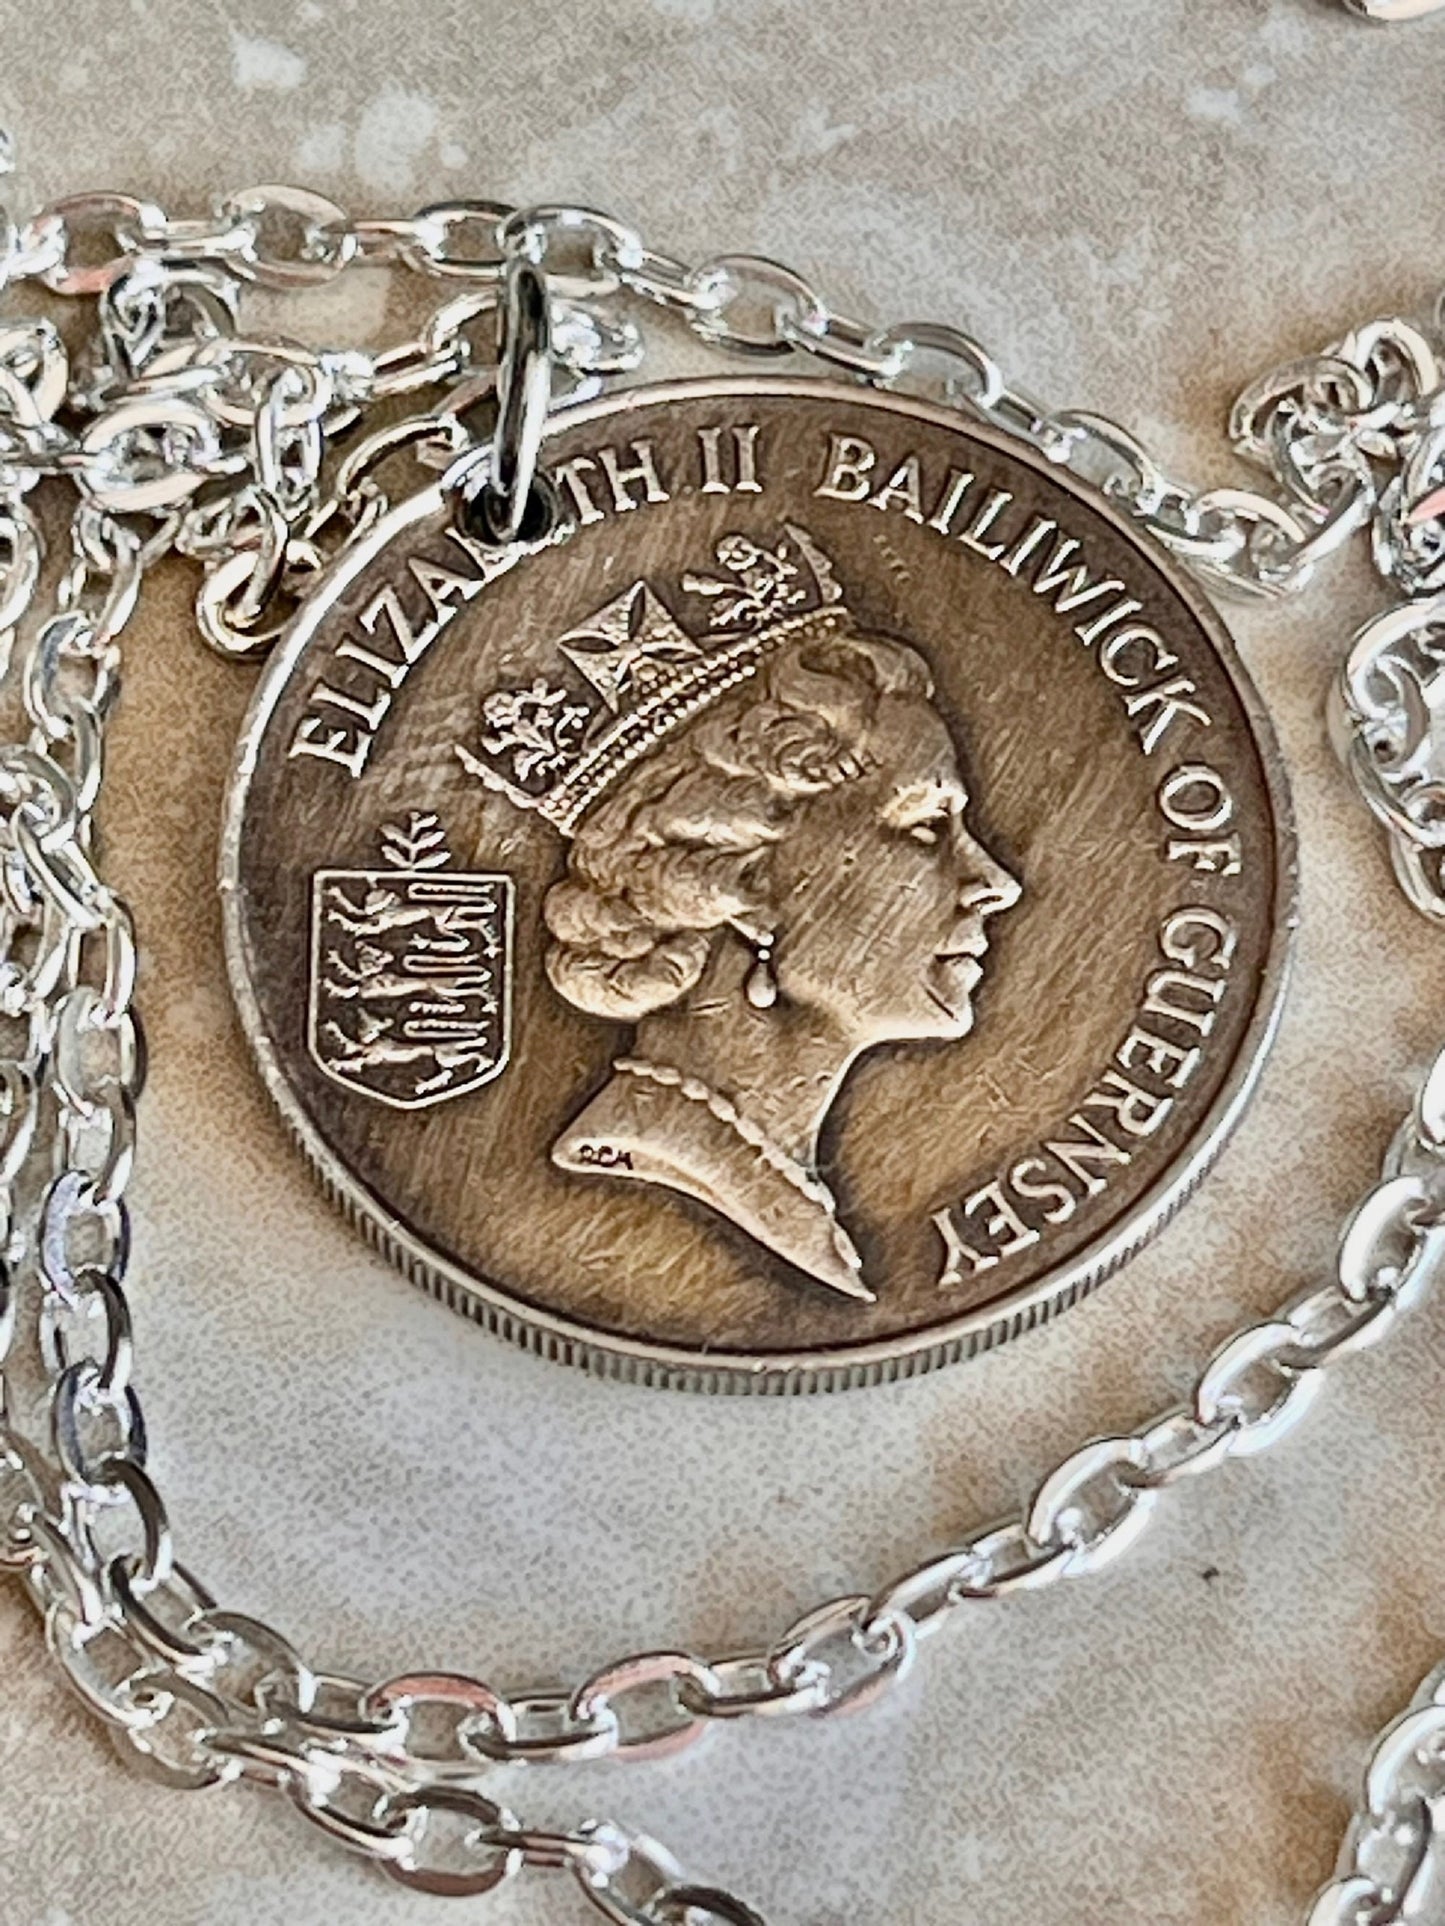 Guernsey Coin Necklace 10 Pence Pendant Handmade Custom Made Charm Gift For Friend Coin Charm Gift For Him Her, Coin Collector, World Coins